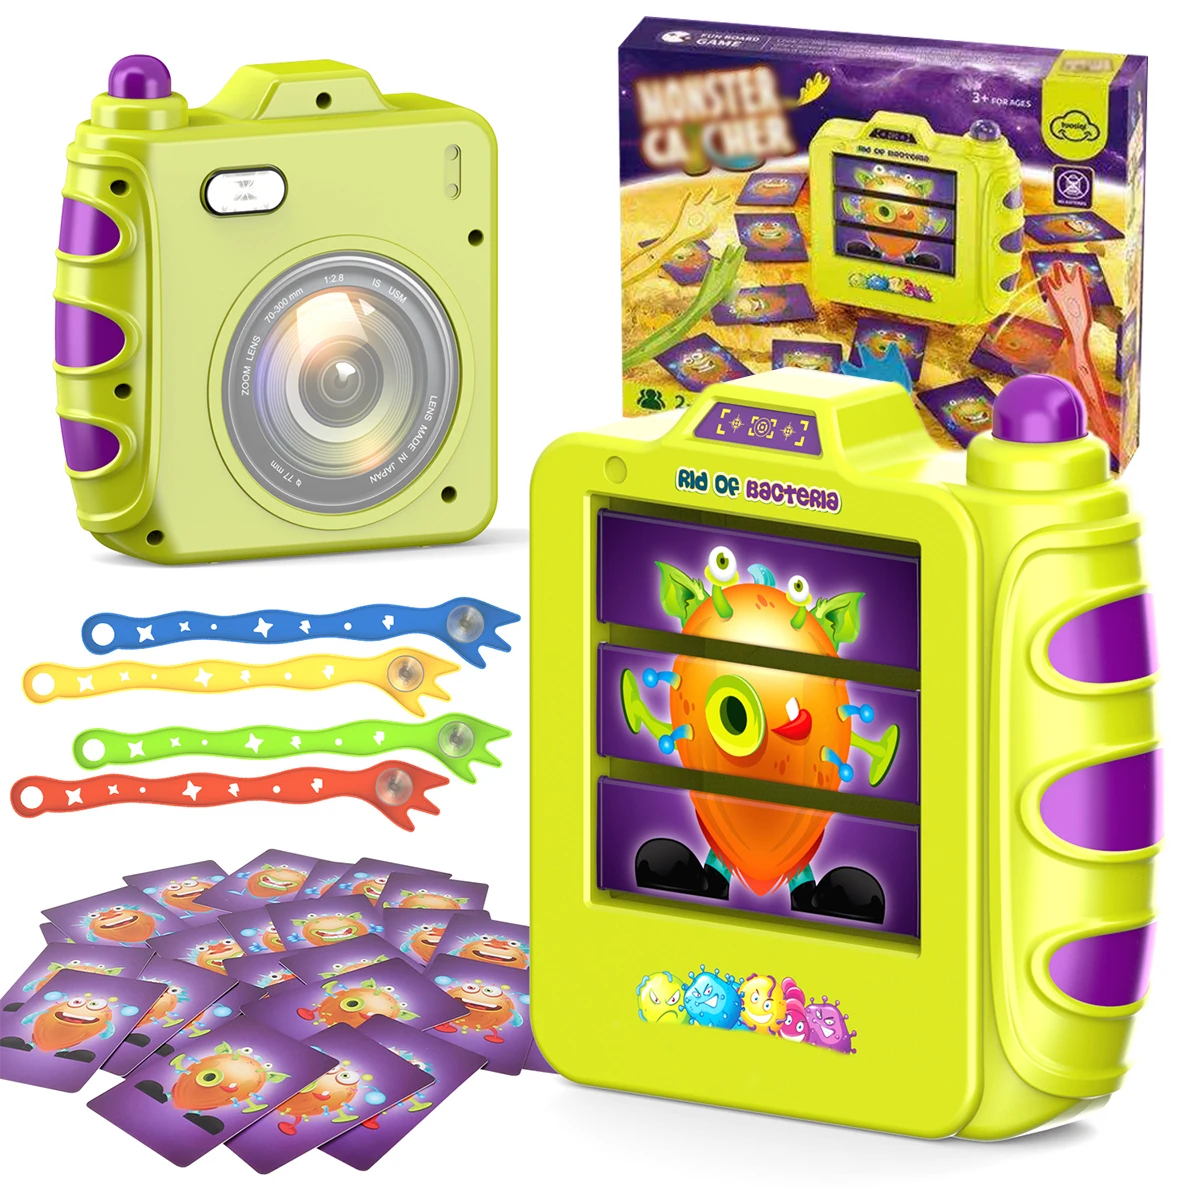 hunting-monsters-card-projection-set-tab-board-game-digital-video-camera-montessori-interactive-educational-children-toys-gift